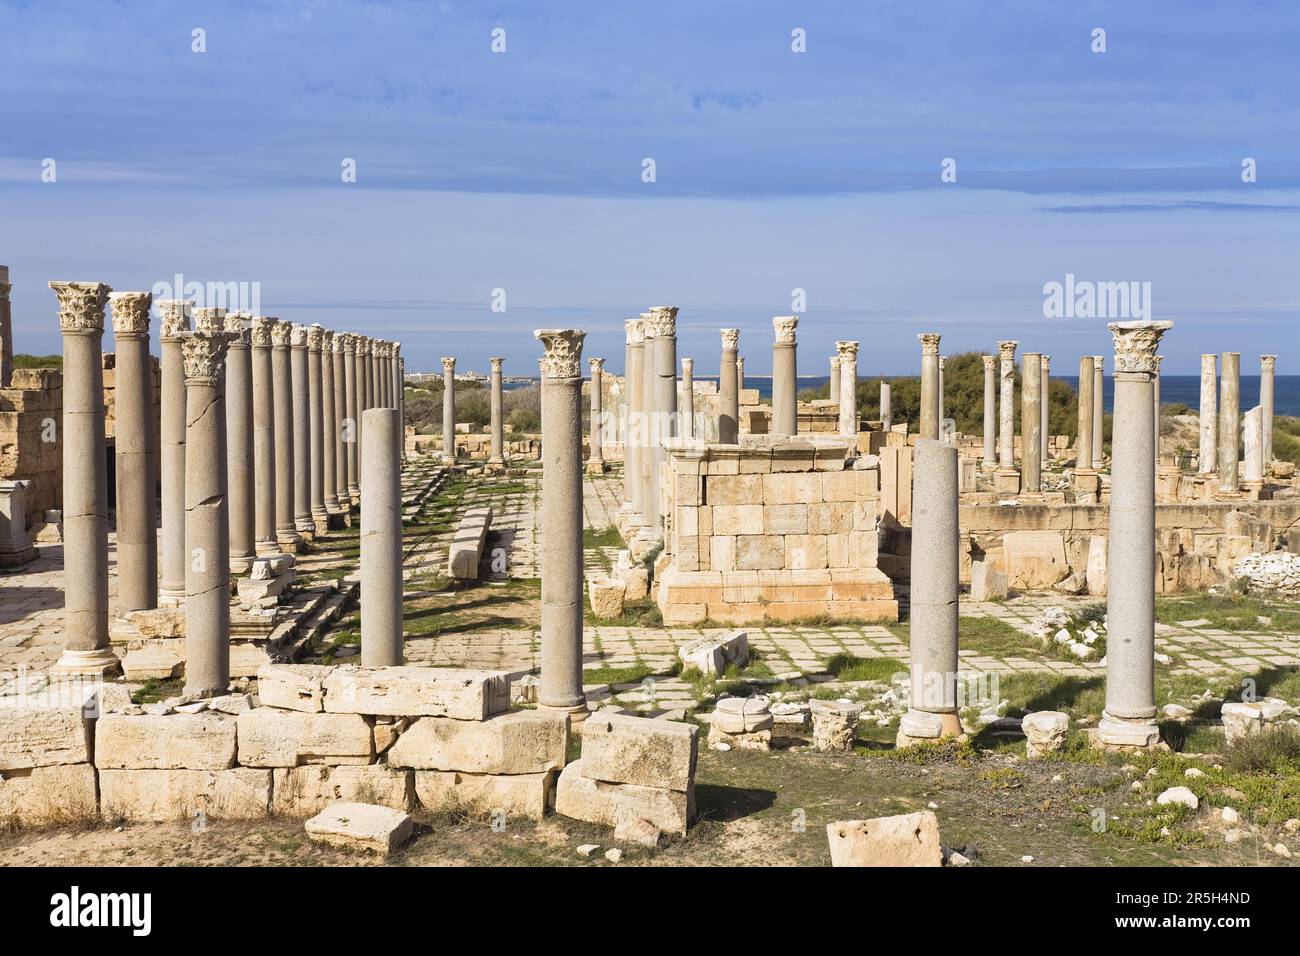 Temple of Augustus, ruined city of Leptis Magna, Libya Stock Photo